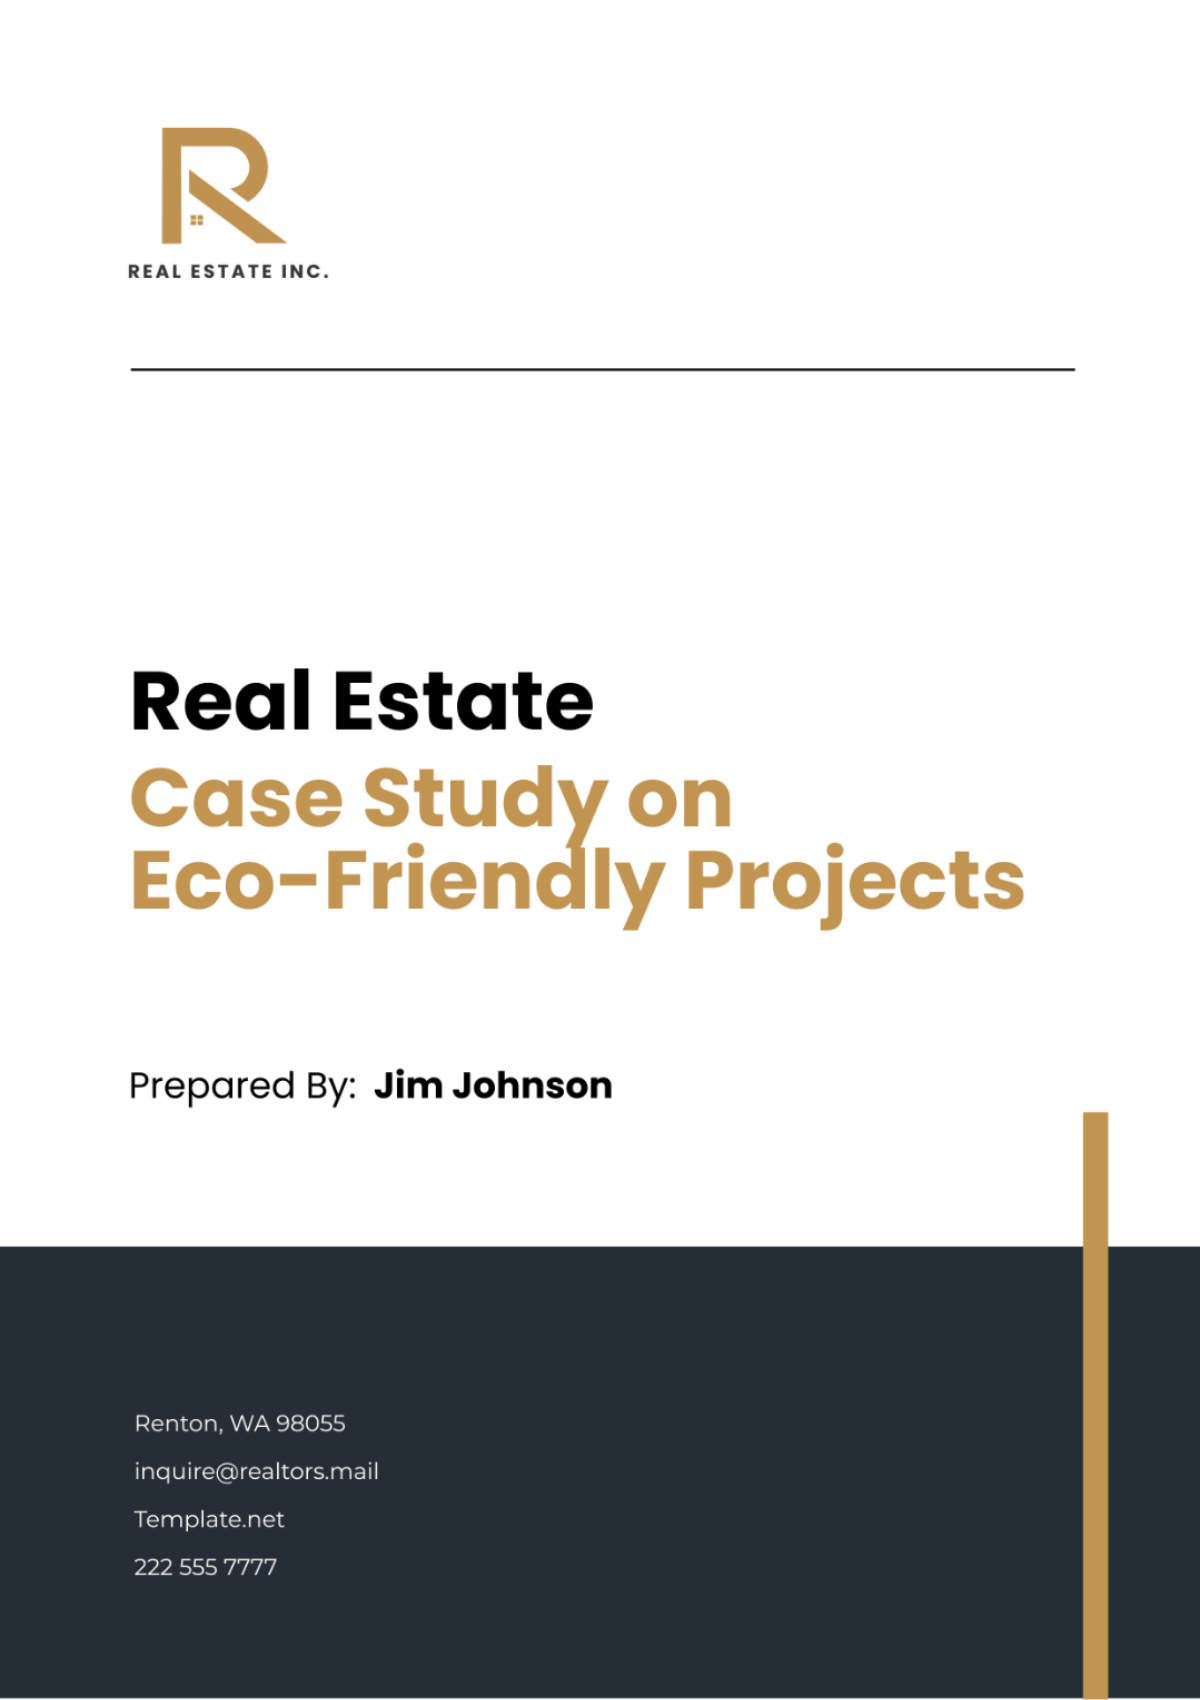 Free Real Estate Case Study on Eco-Friendly Projects Template